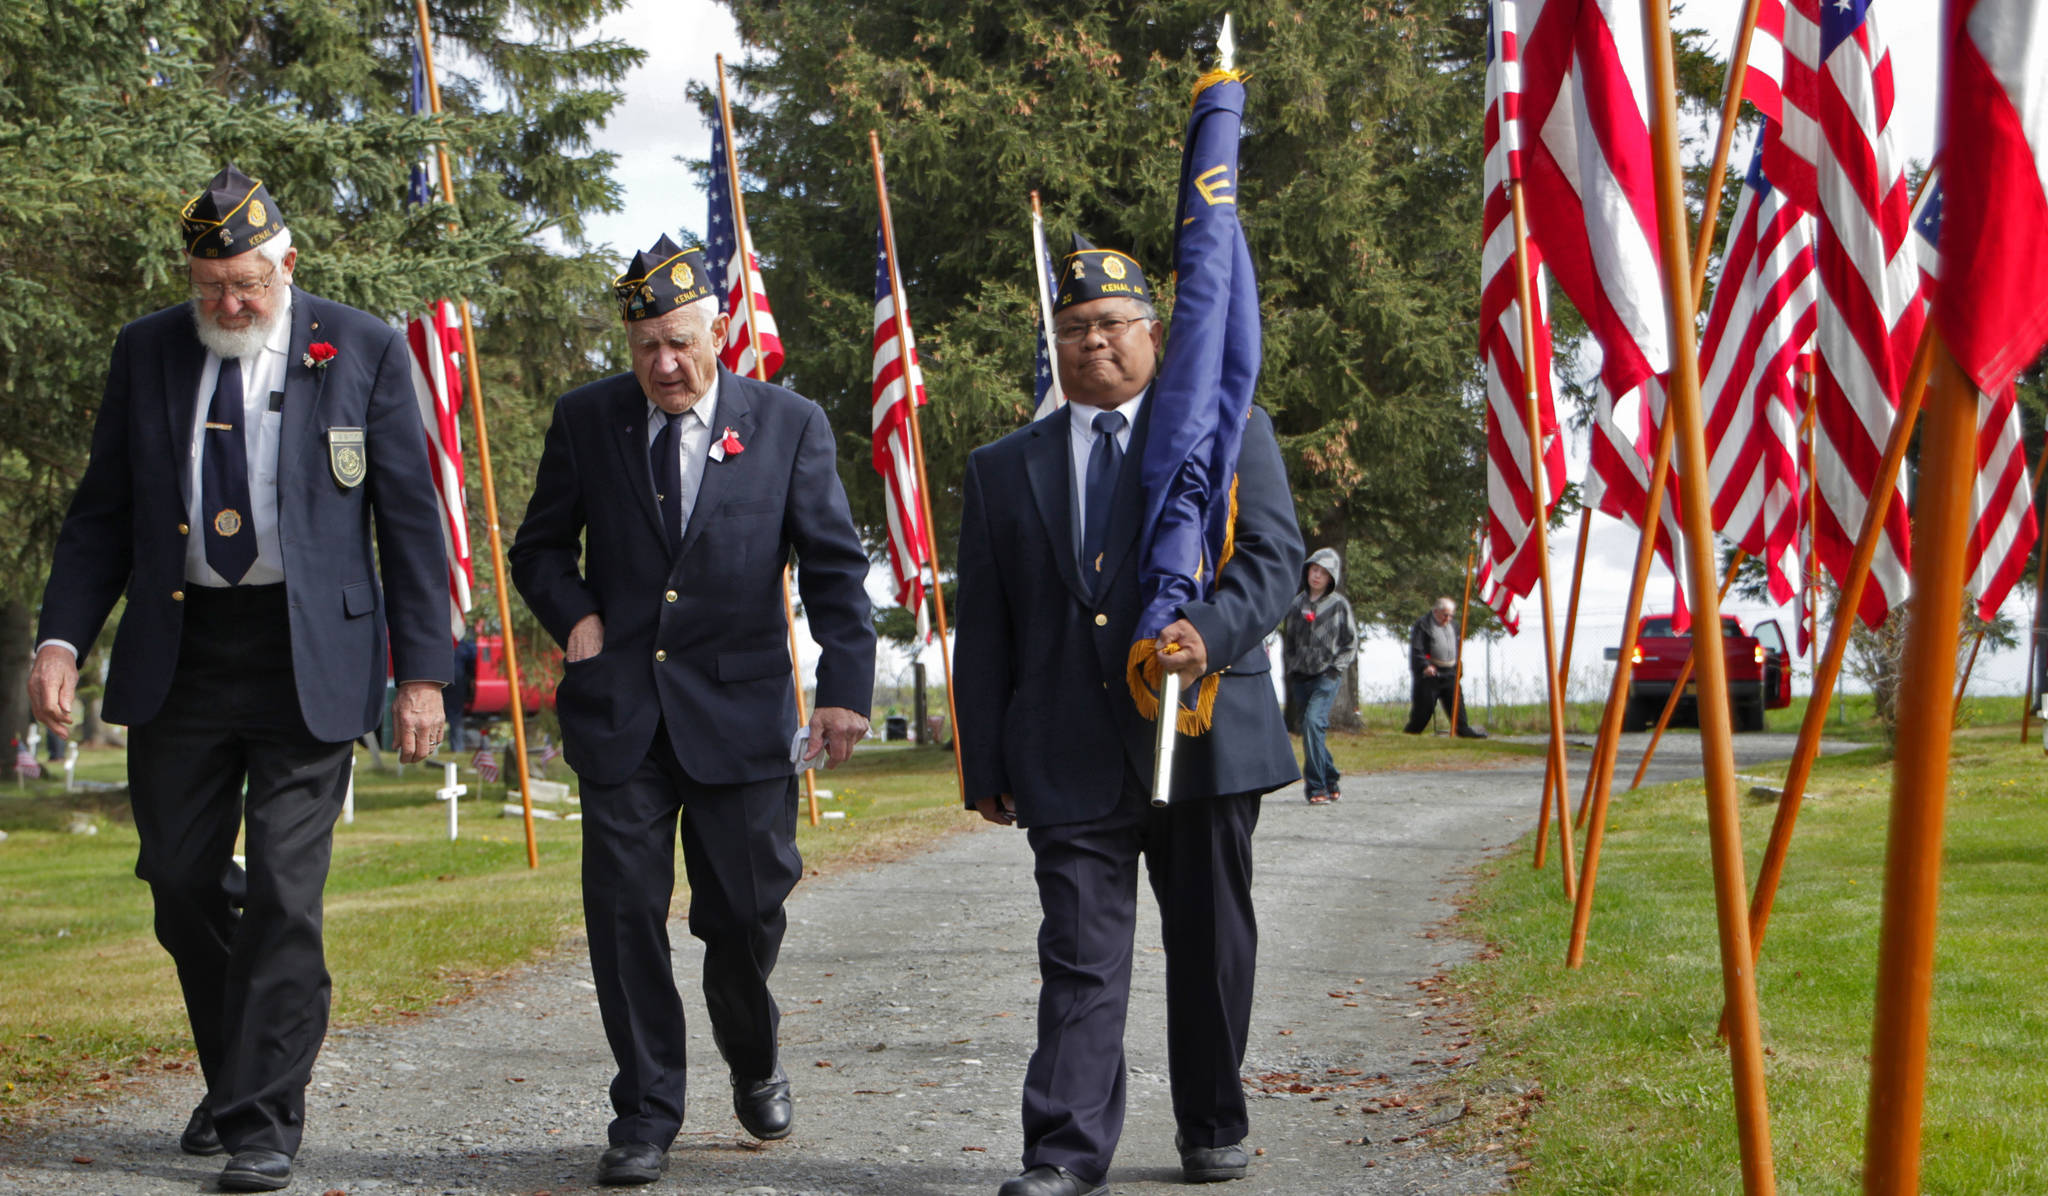 American Legion members Ray Nickleson (left), Joe Coup, and Alvin Diaz leave the Kenai Cemetery after participating in a Memorial Day ceremony on Monday, May 29, 2017 in Kenai, Alaska. (Ben Boettger/Peninsula Clarion)